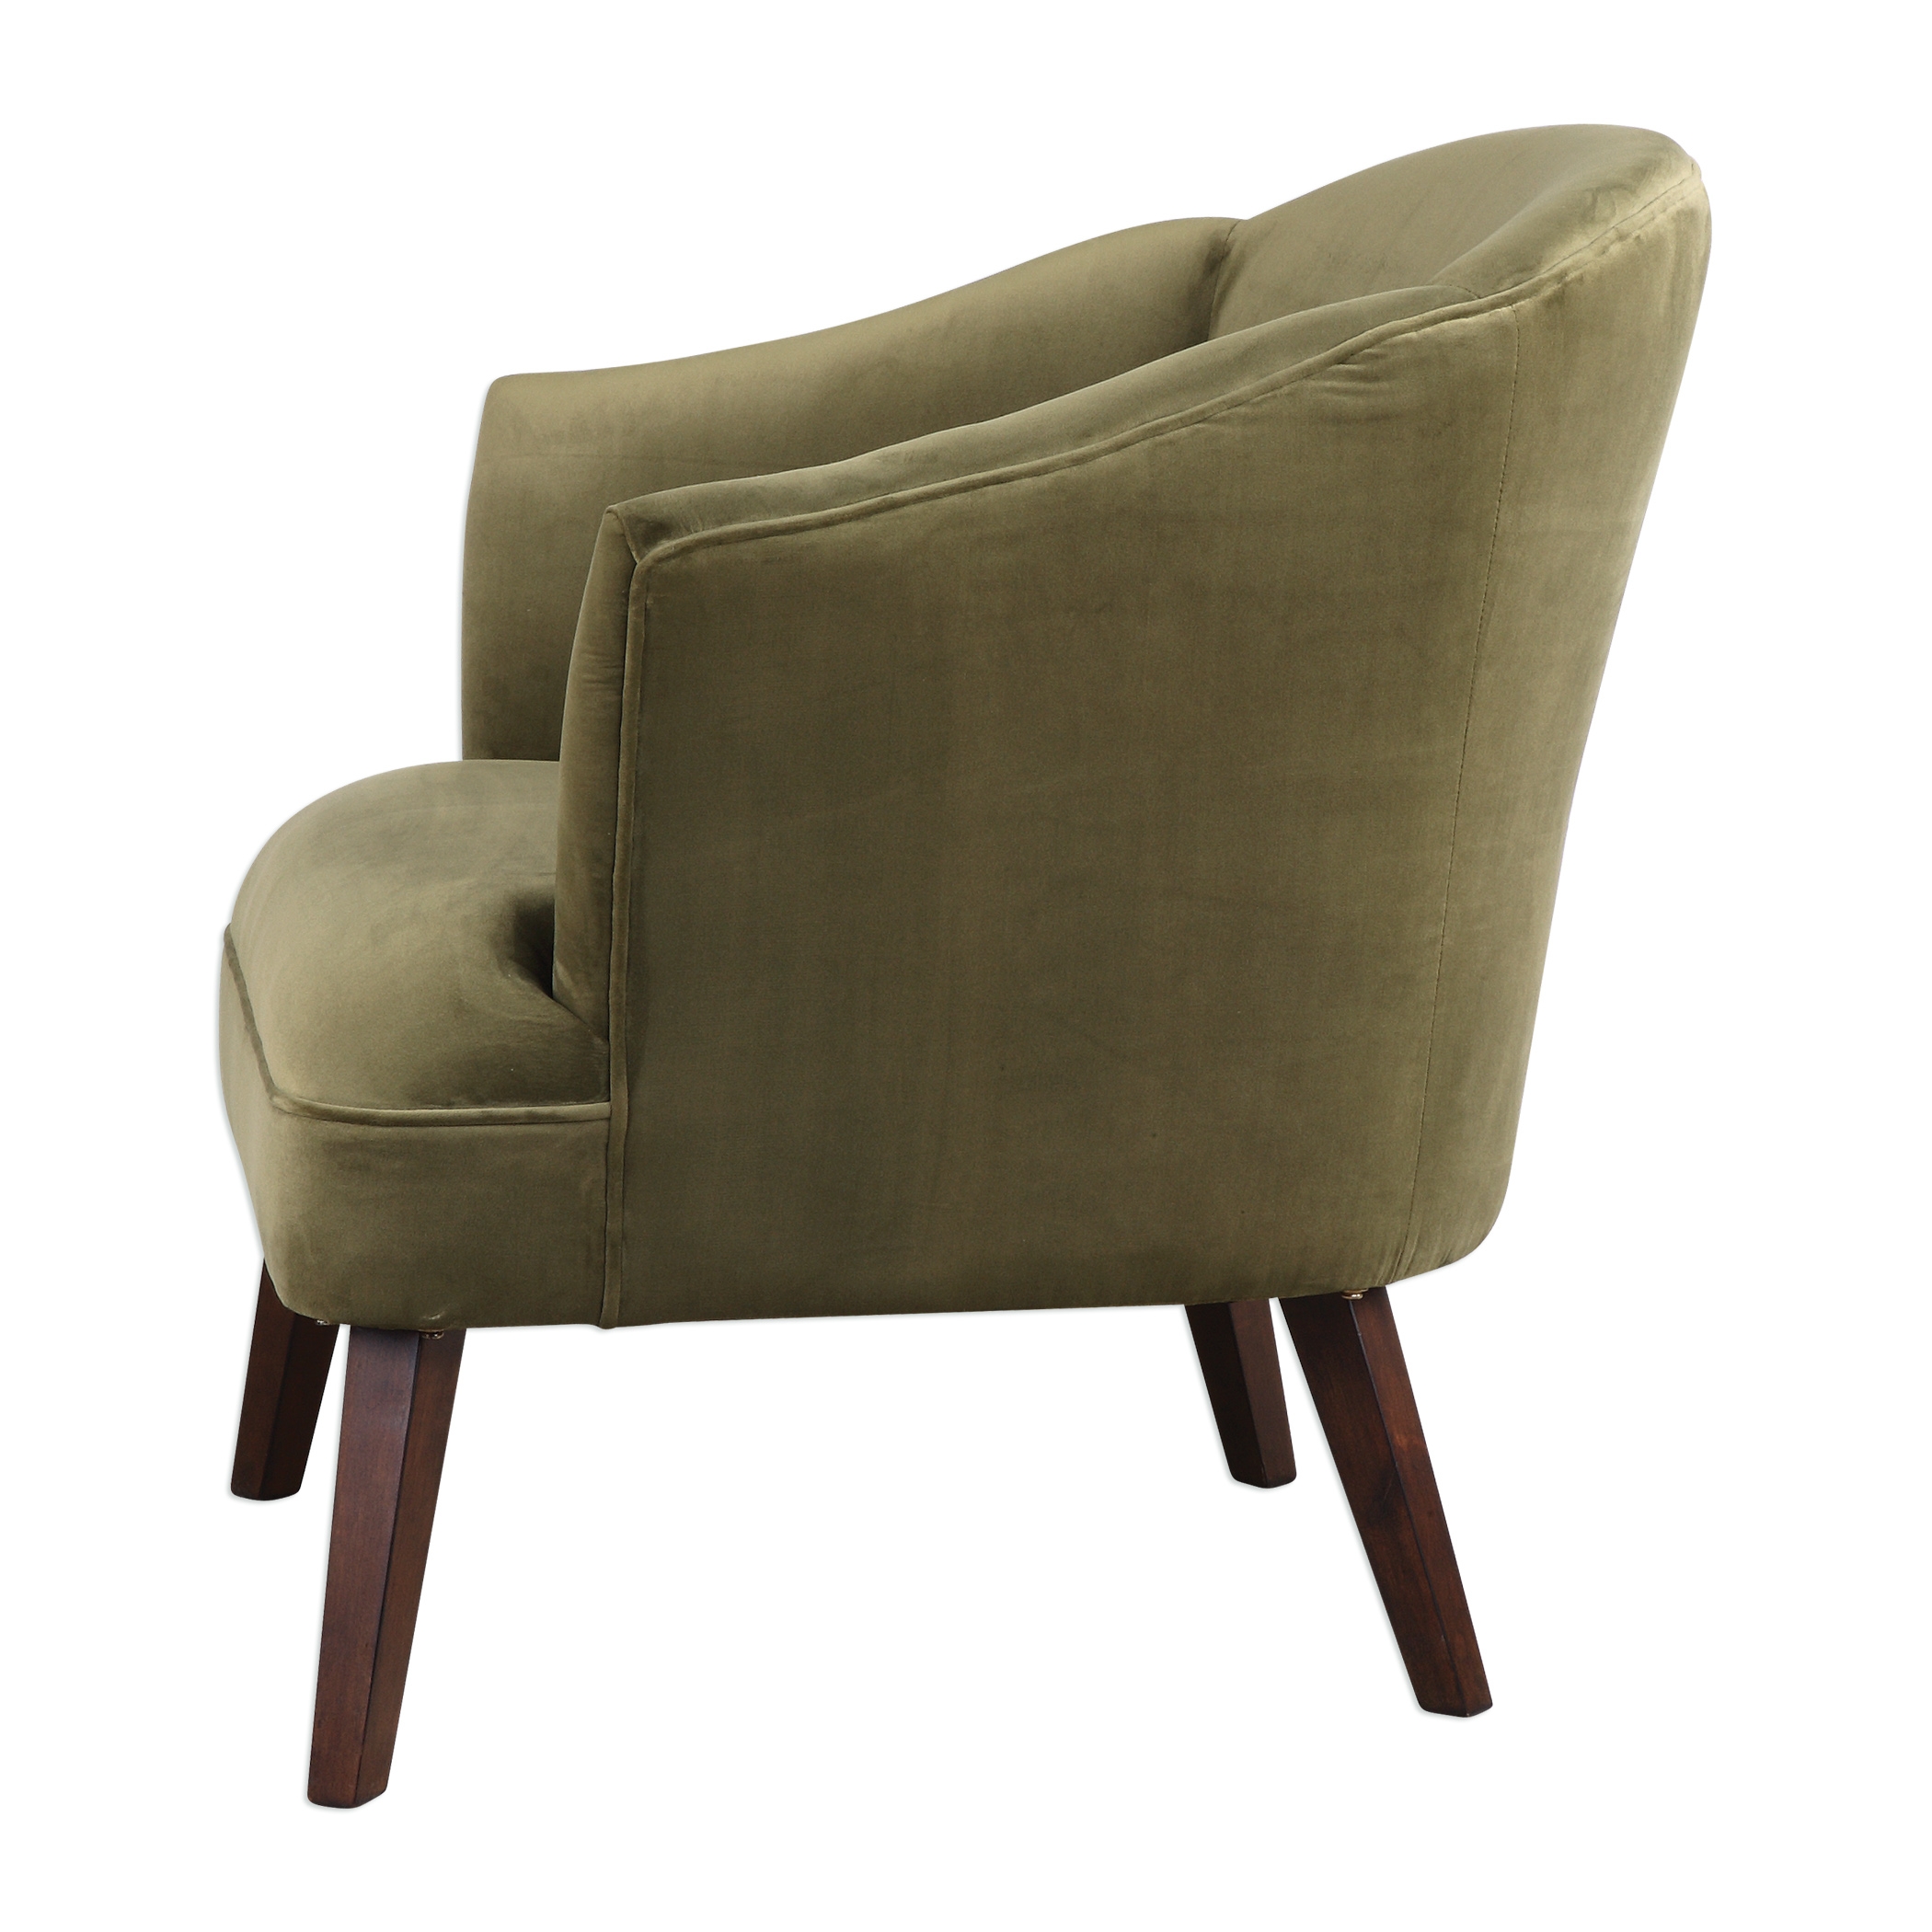 Conroy Accent Chair, Olive - Image 3